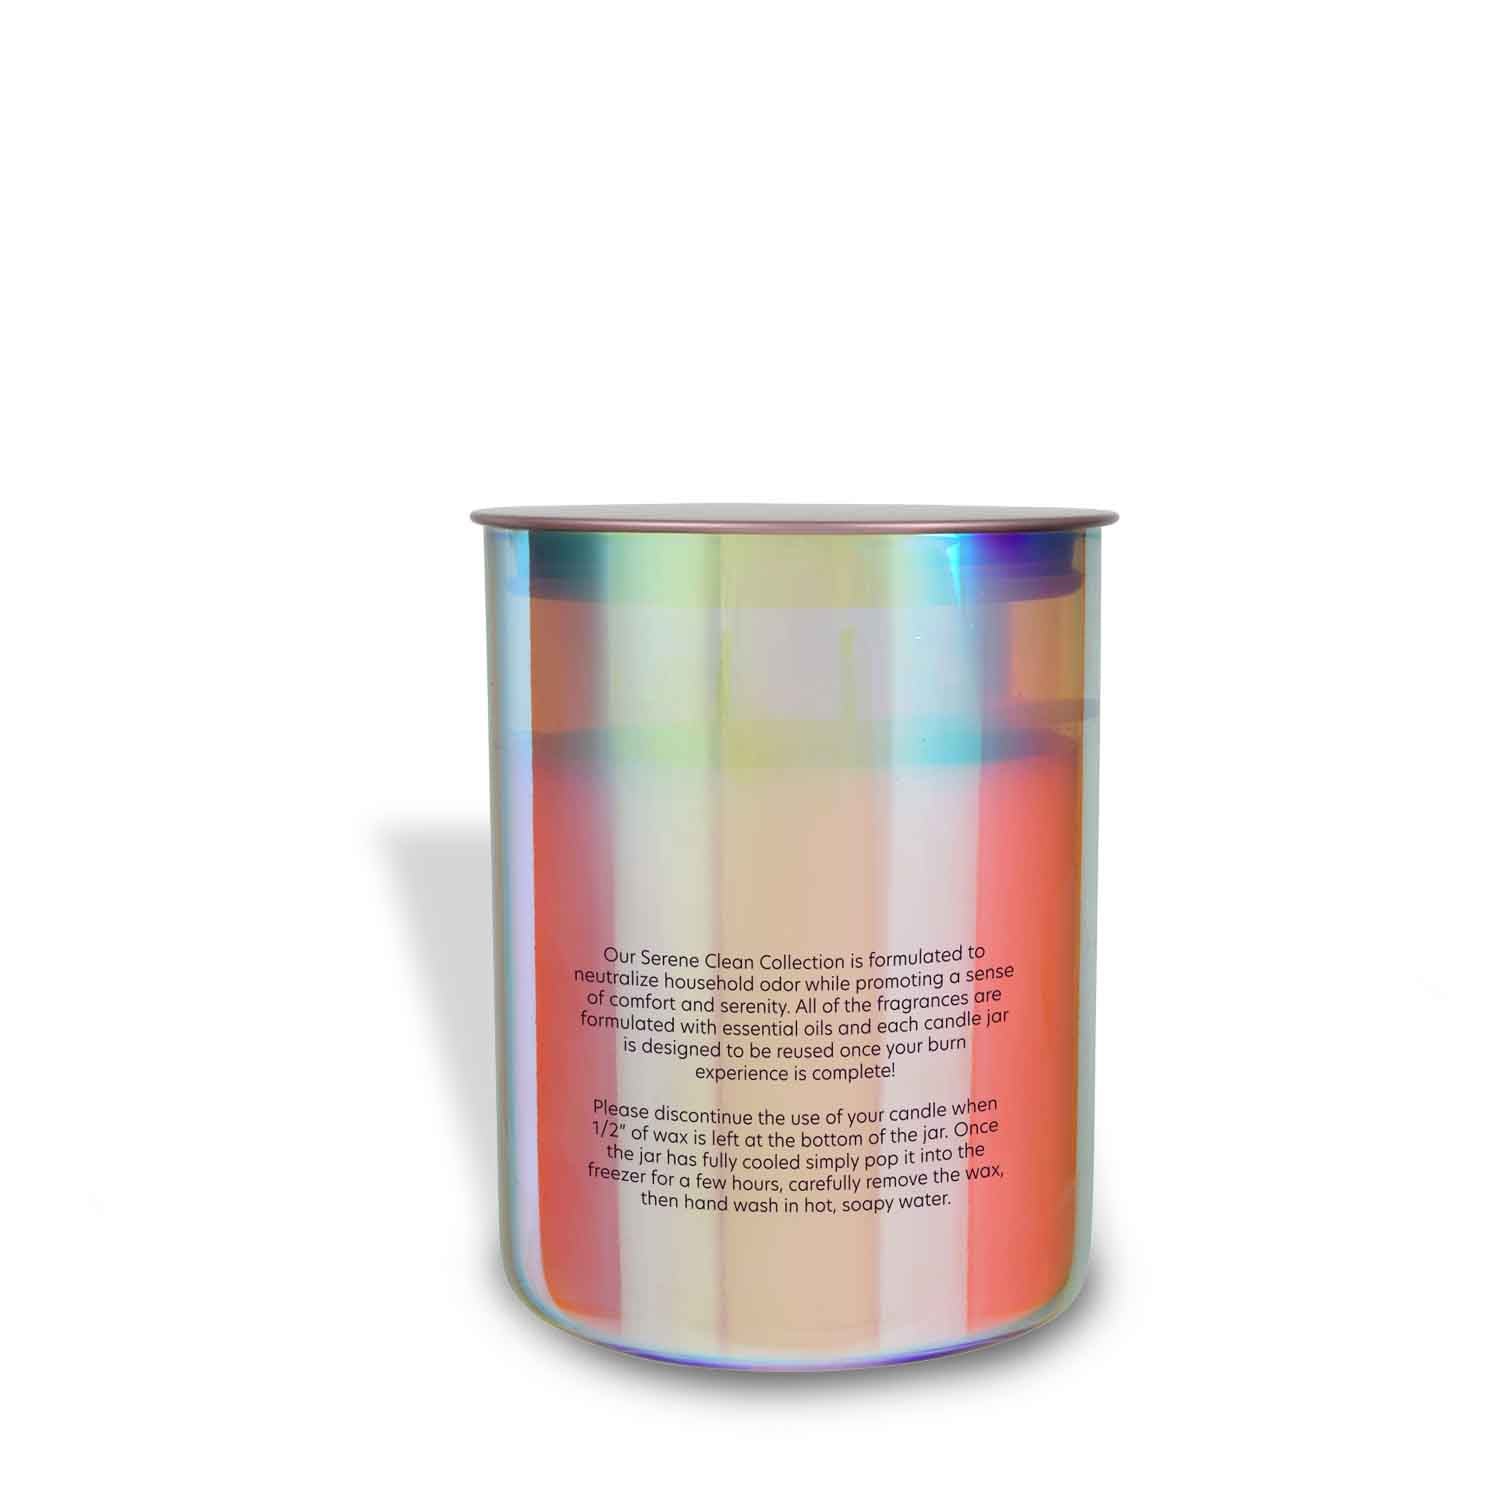 A tin can with a rainbow holographic pattern on it, ideal for storing Coastal Pine Scented Jar Candle (12 oz) – Serene Clean Collection by Tuscany Candle® EVD.